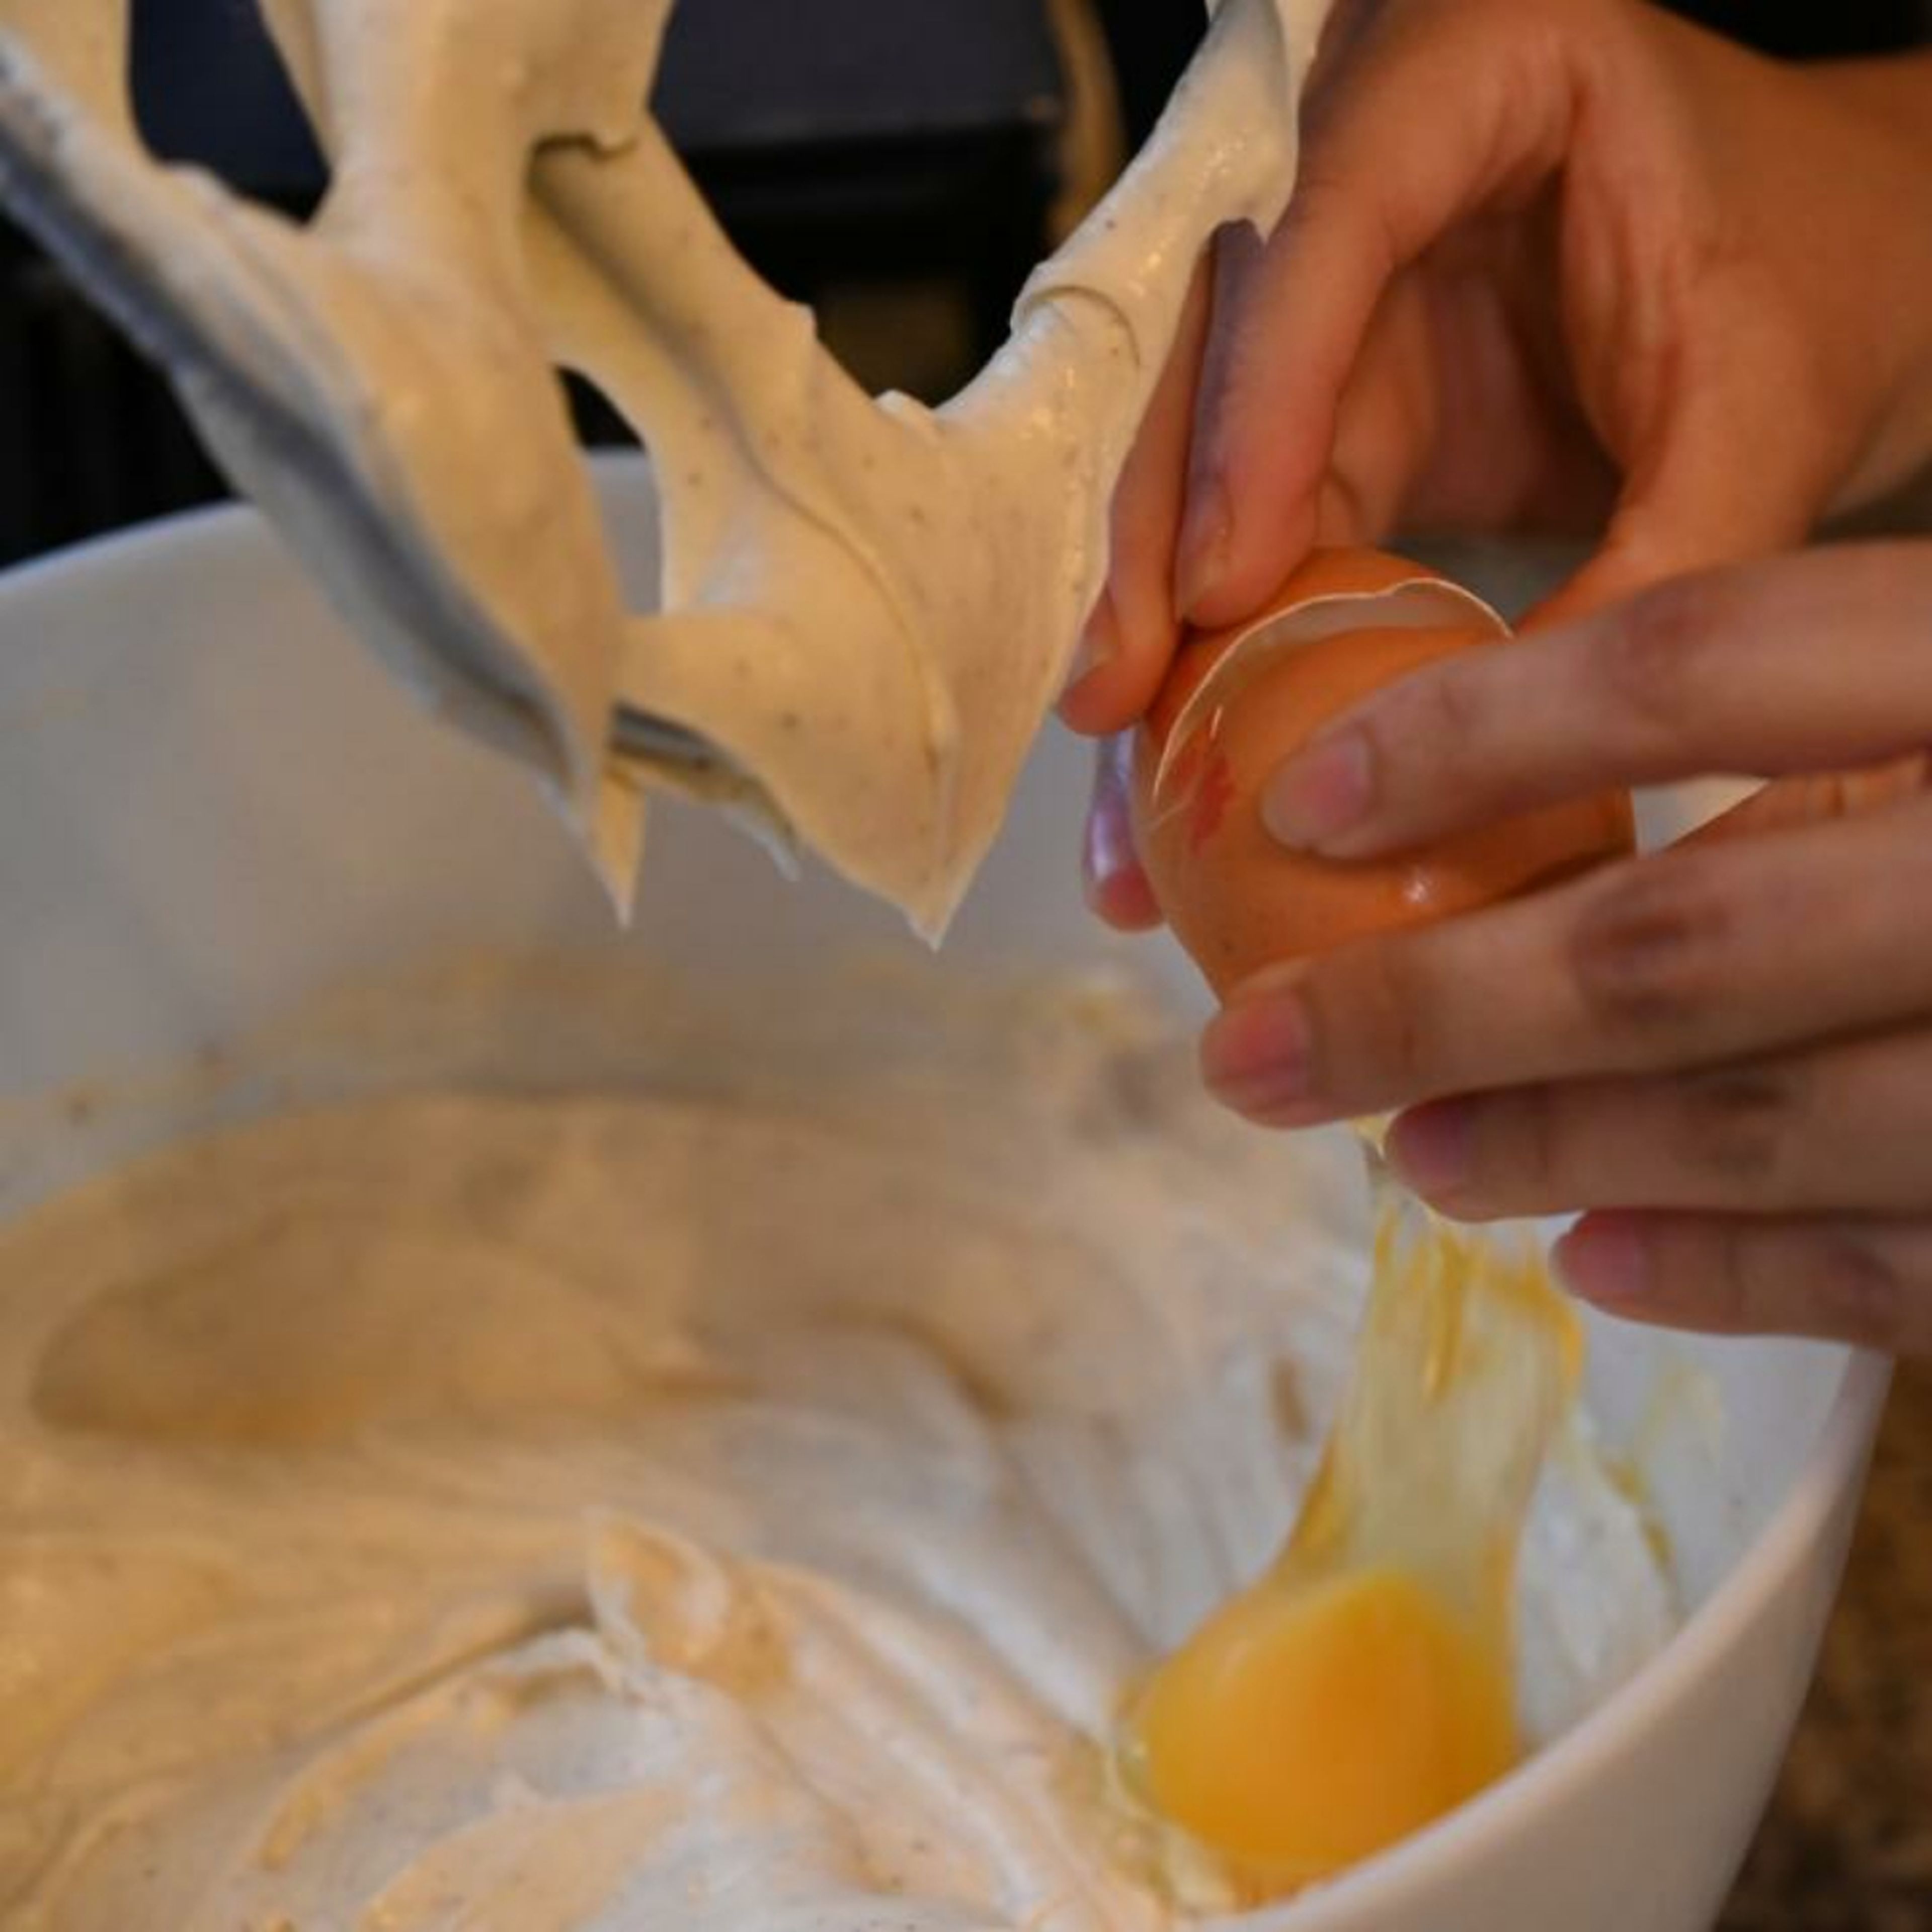 Add the eggs and egg yolks one at a time and continue whisking, until fully combined.